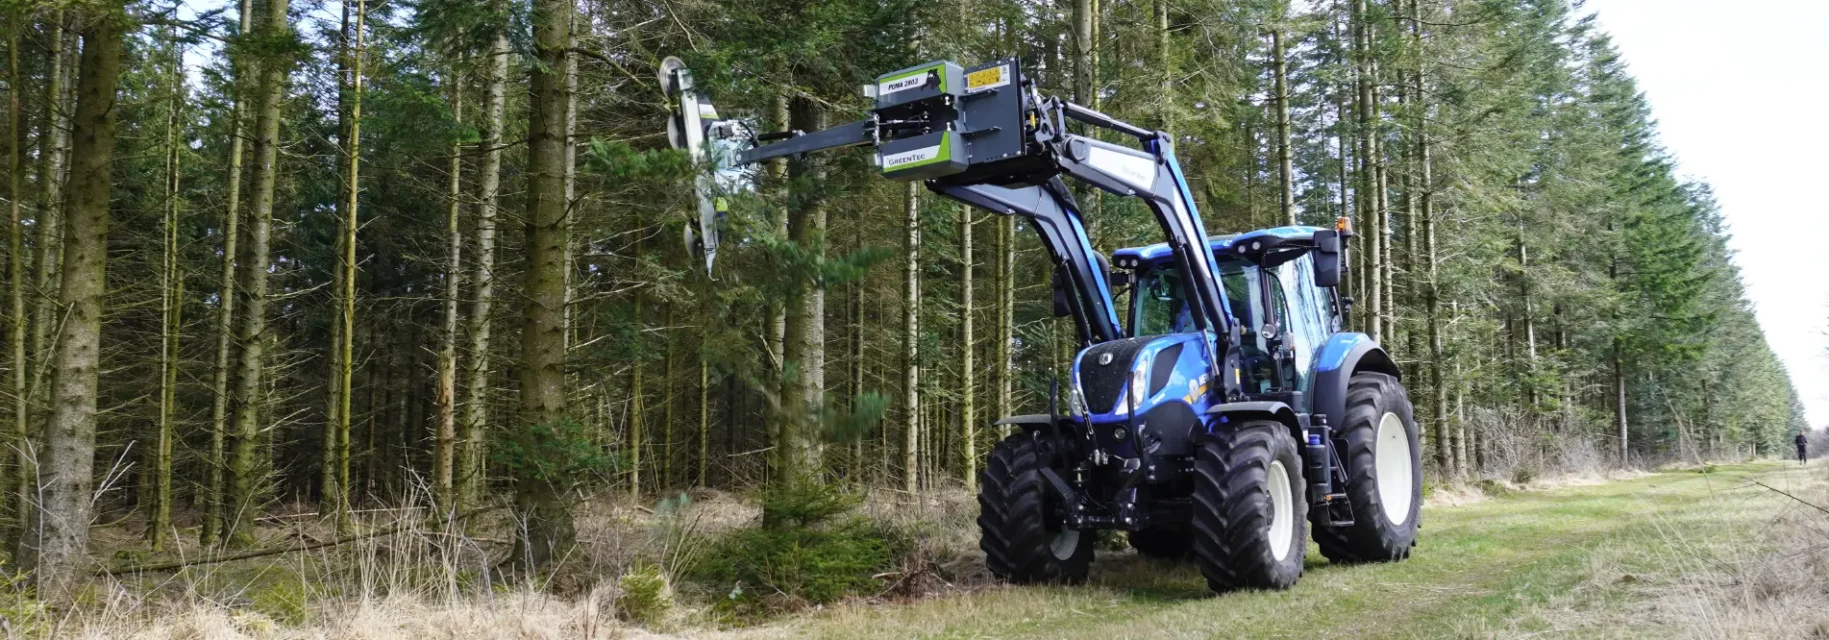 Tree trimmer attachment for front loader